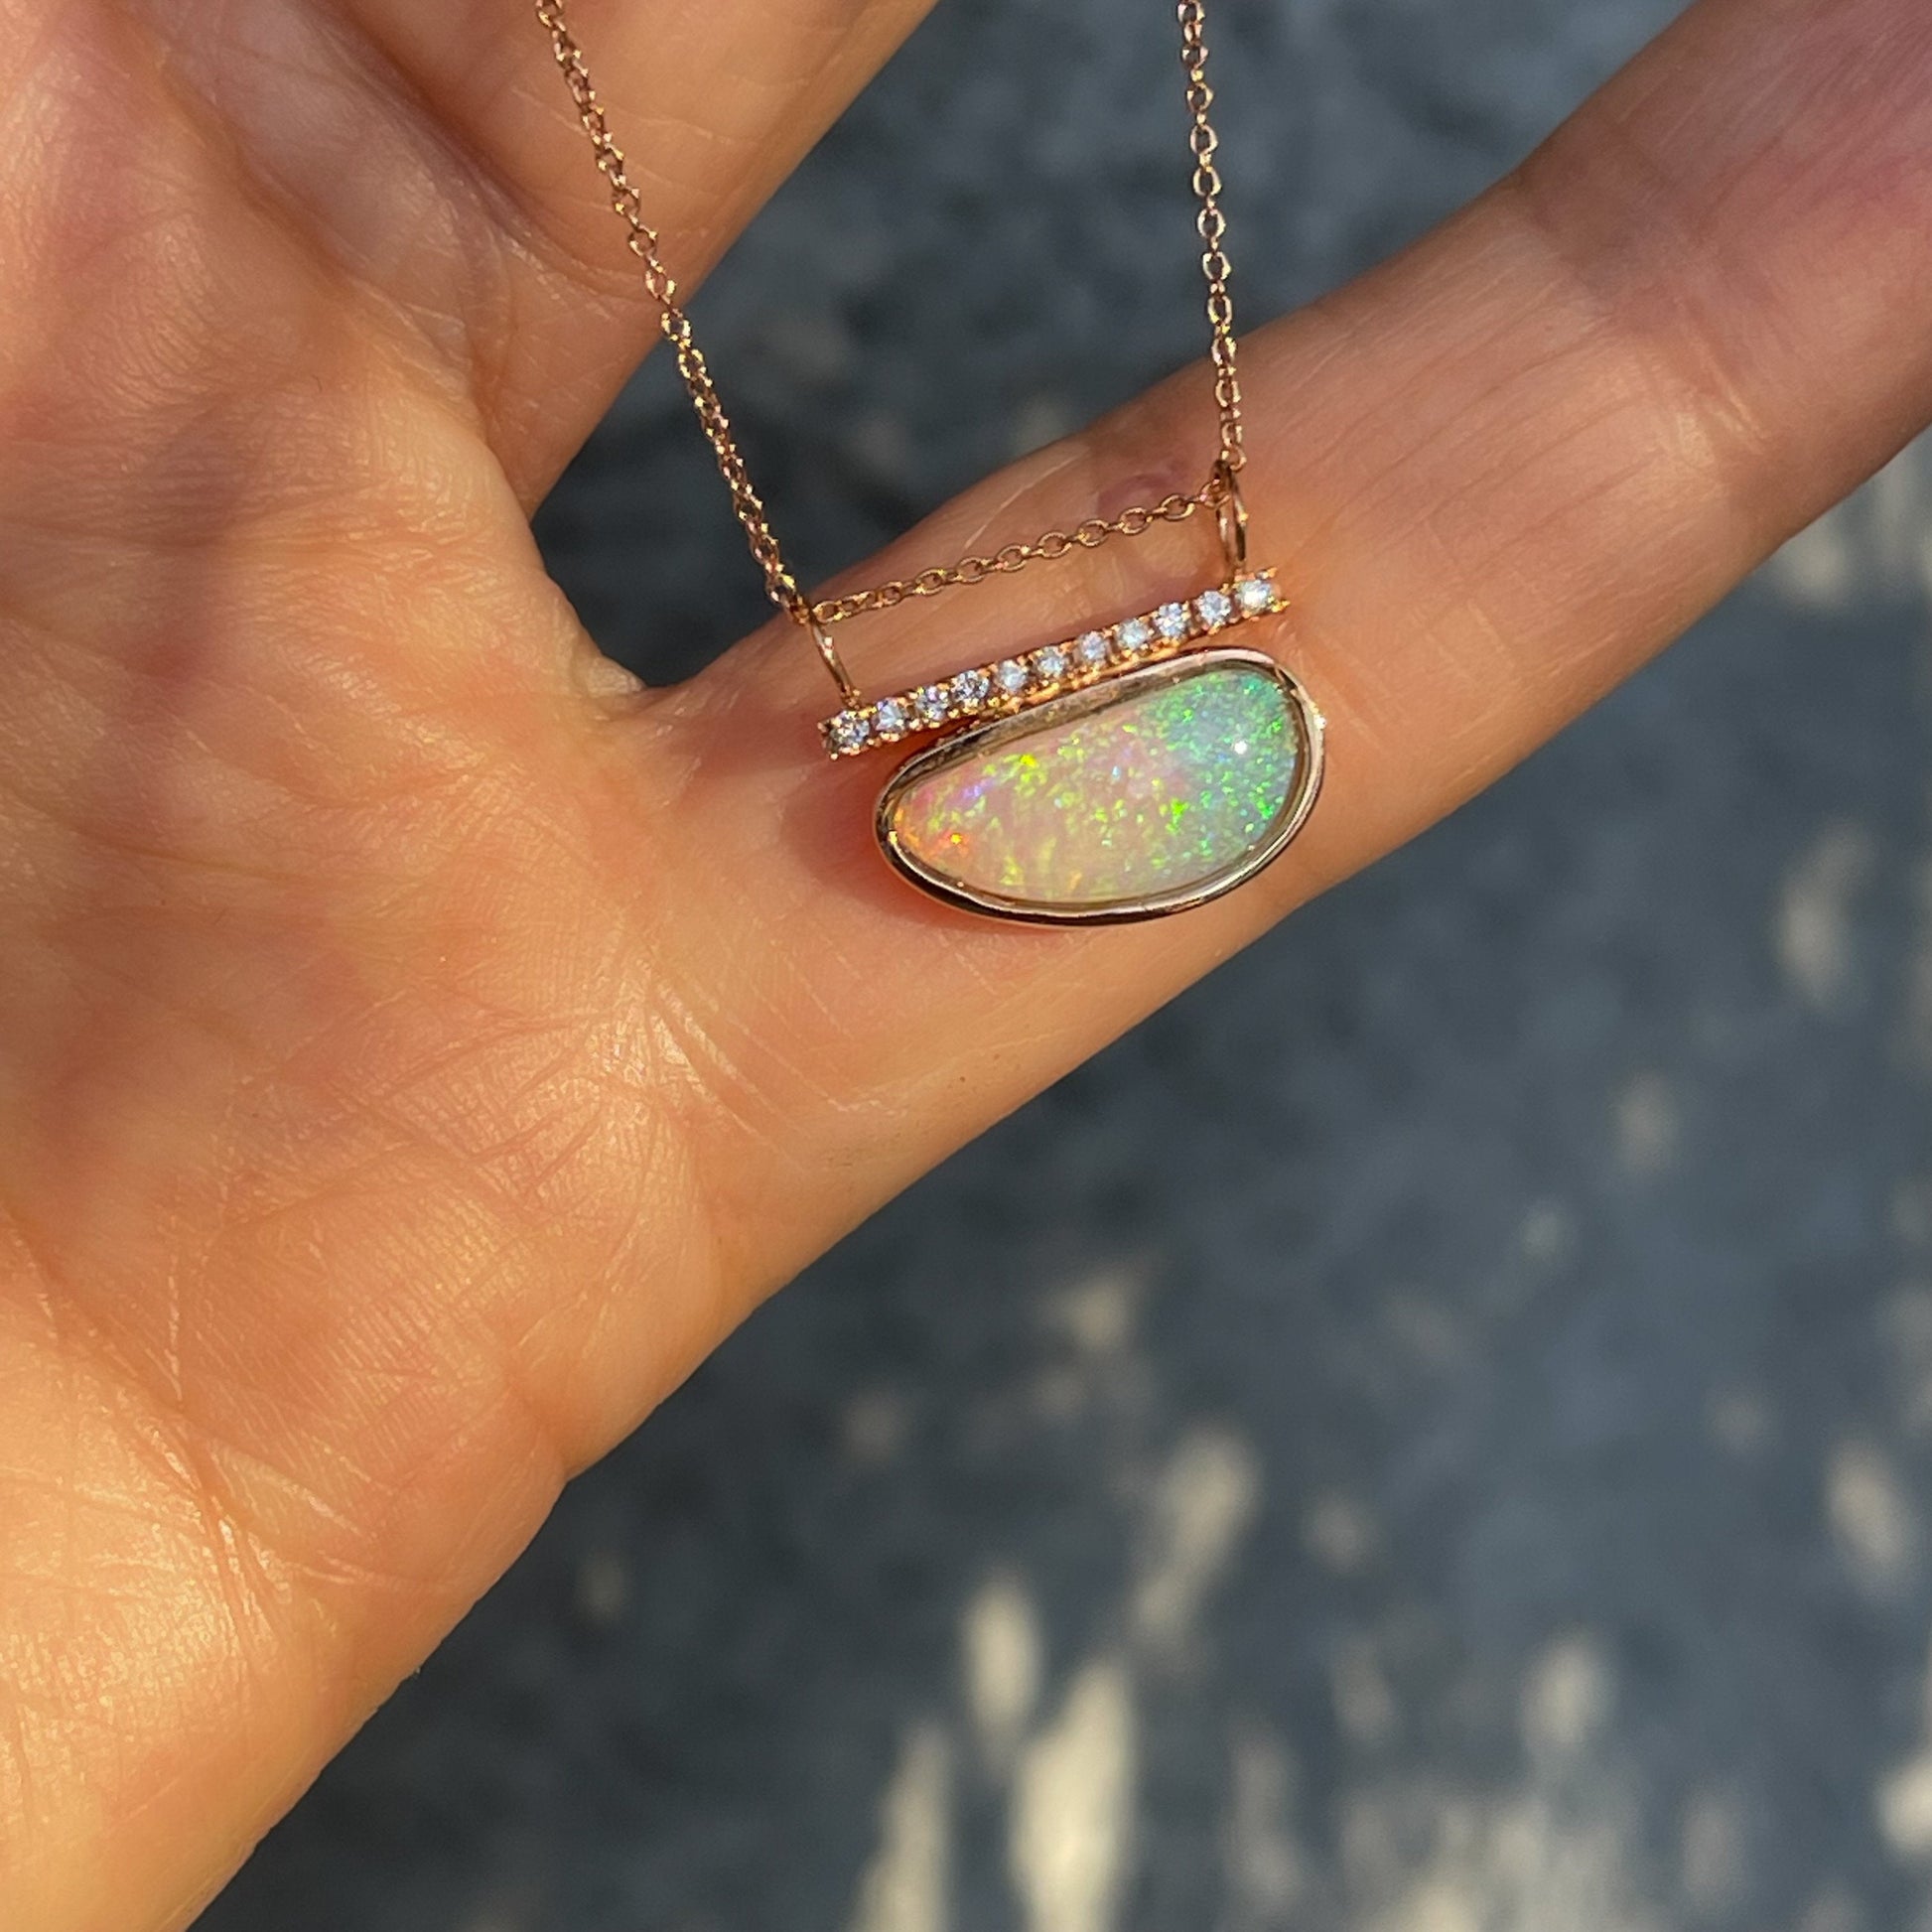 Rose gold opal necklace by NIXIN Jewelry against hand